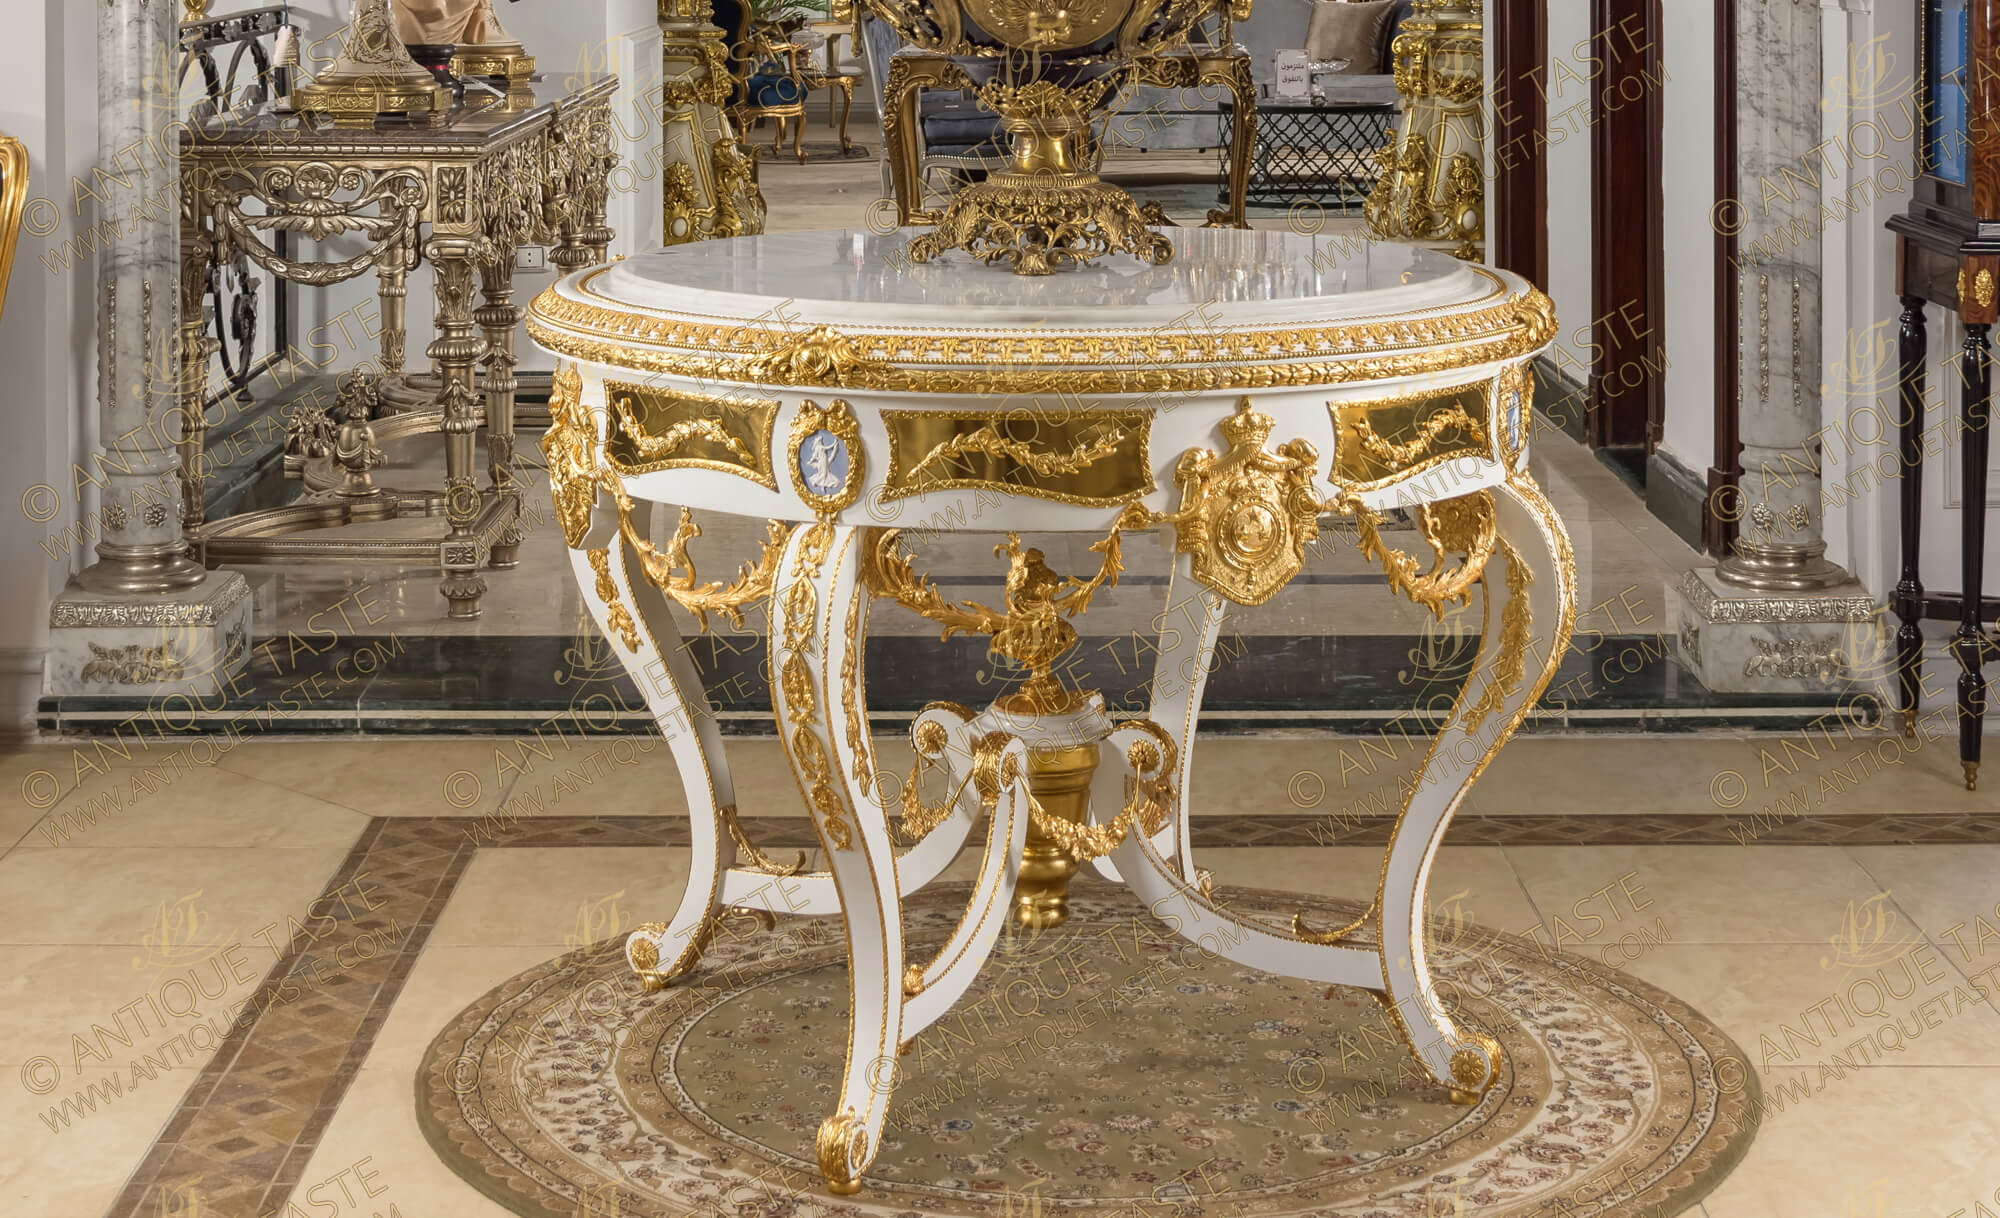 A lavish and luxuriant French Louis XV style gilt-ormolu-mounted white color Royal Center Table, elaborately adorned with the Royal Family Coat of Arms, Wedgwood jasperware plaques, with white marble top and extensive ormolu foliate ornamentation.